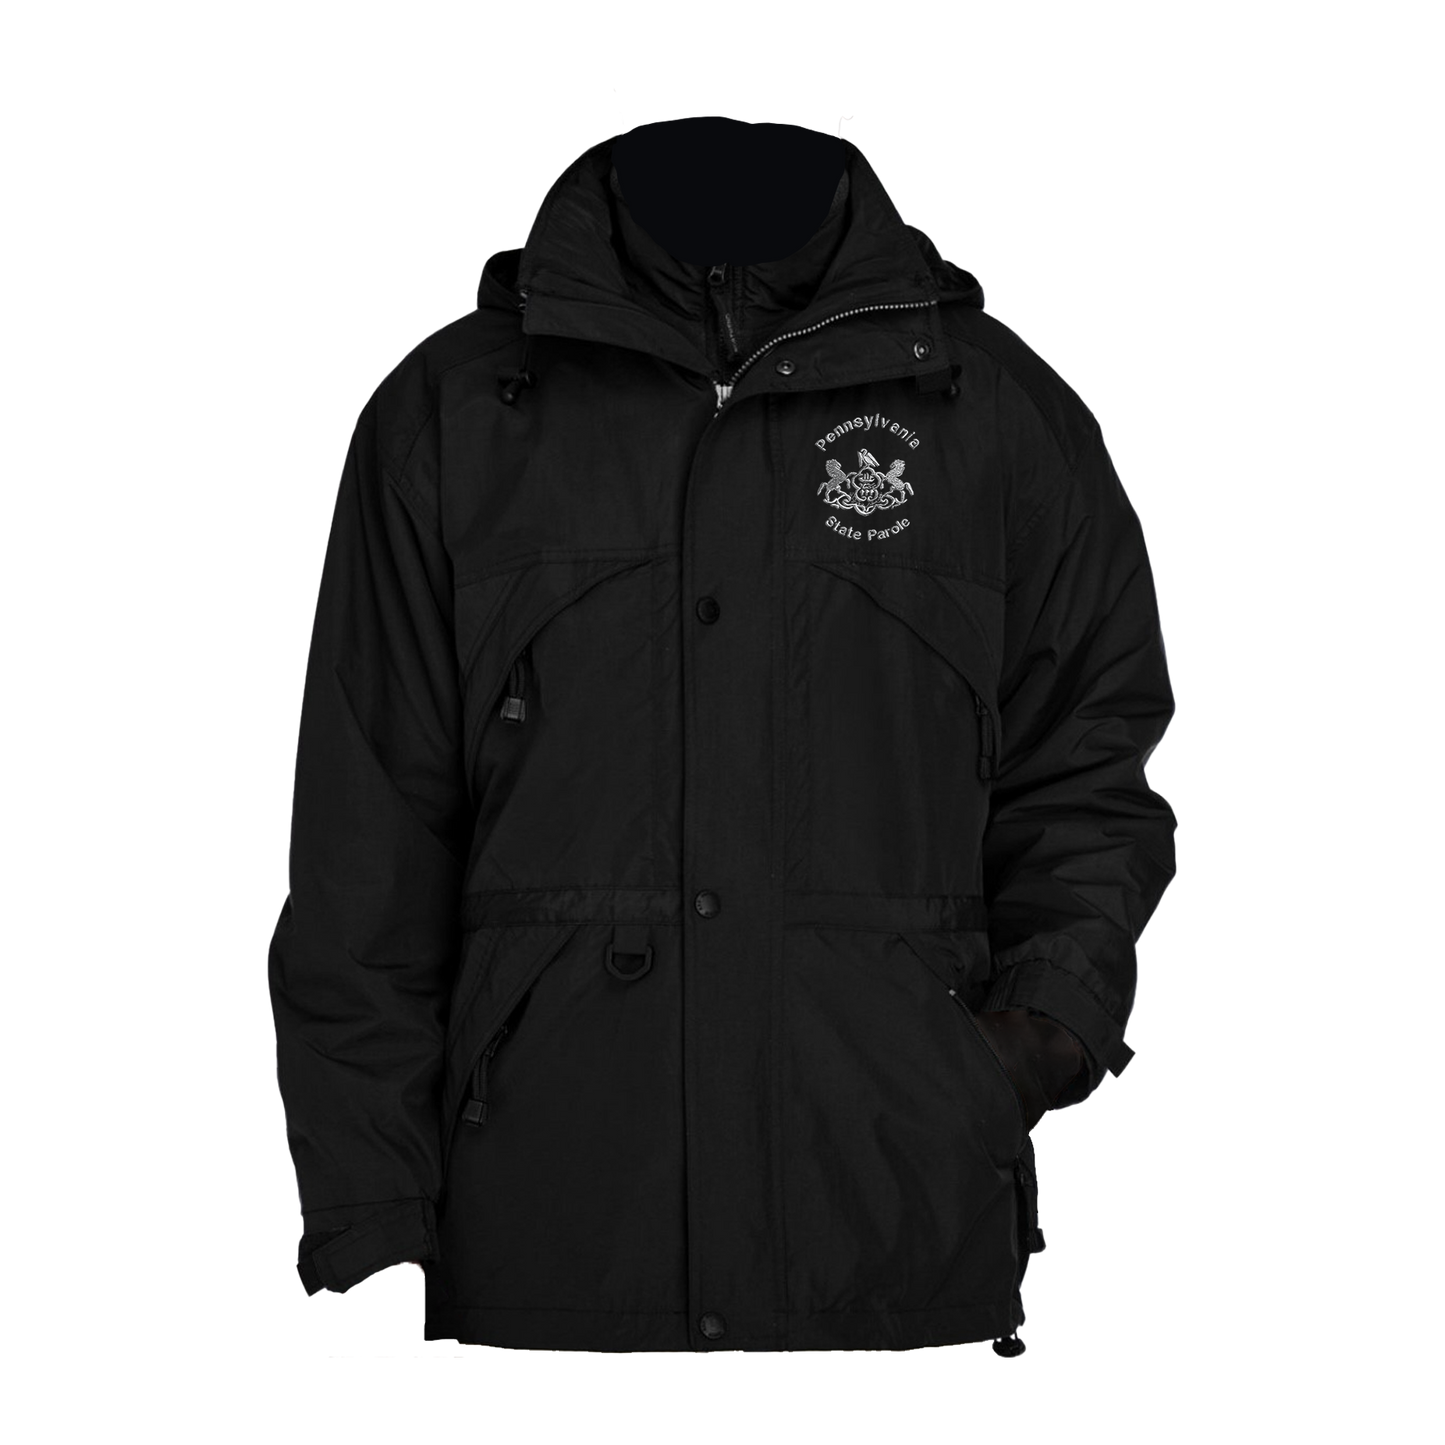 Adult Parka Winter Jacket with Embroidered State Parole Seal